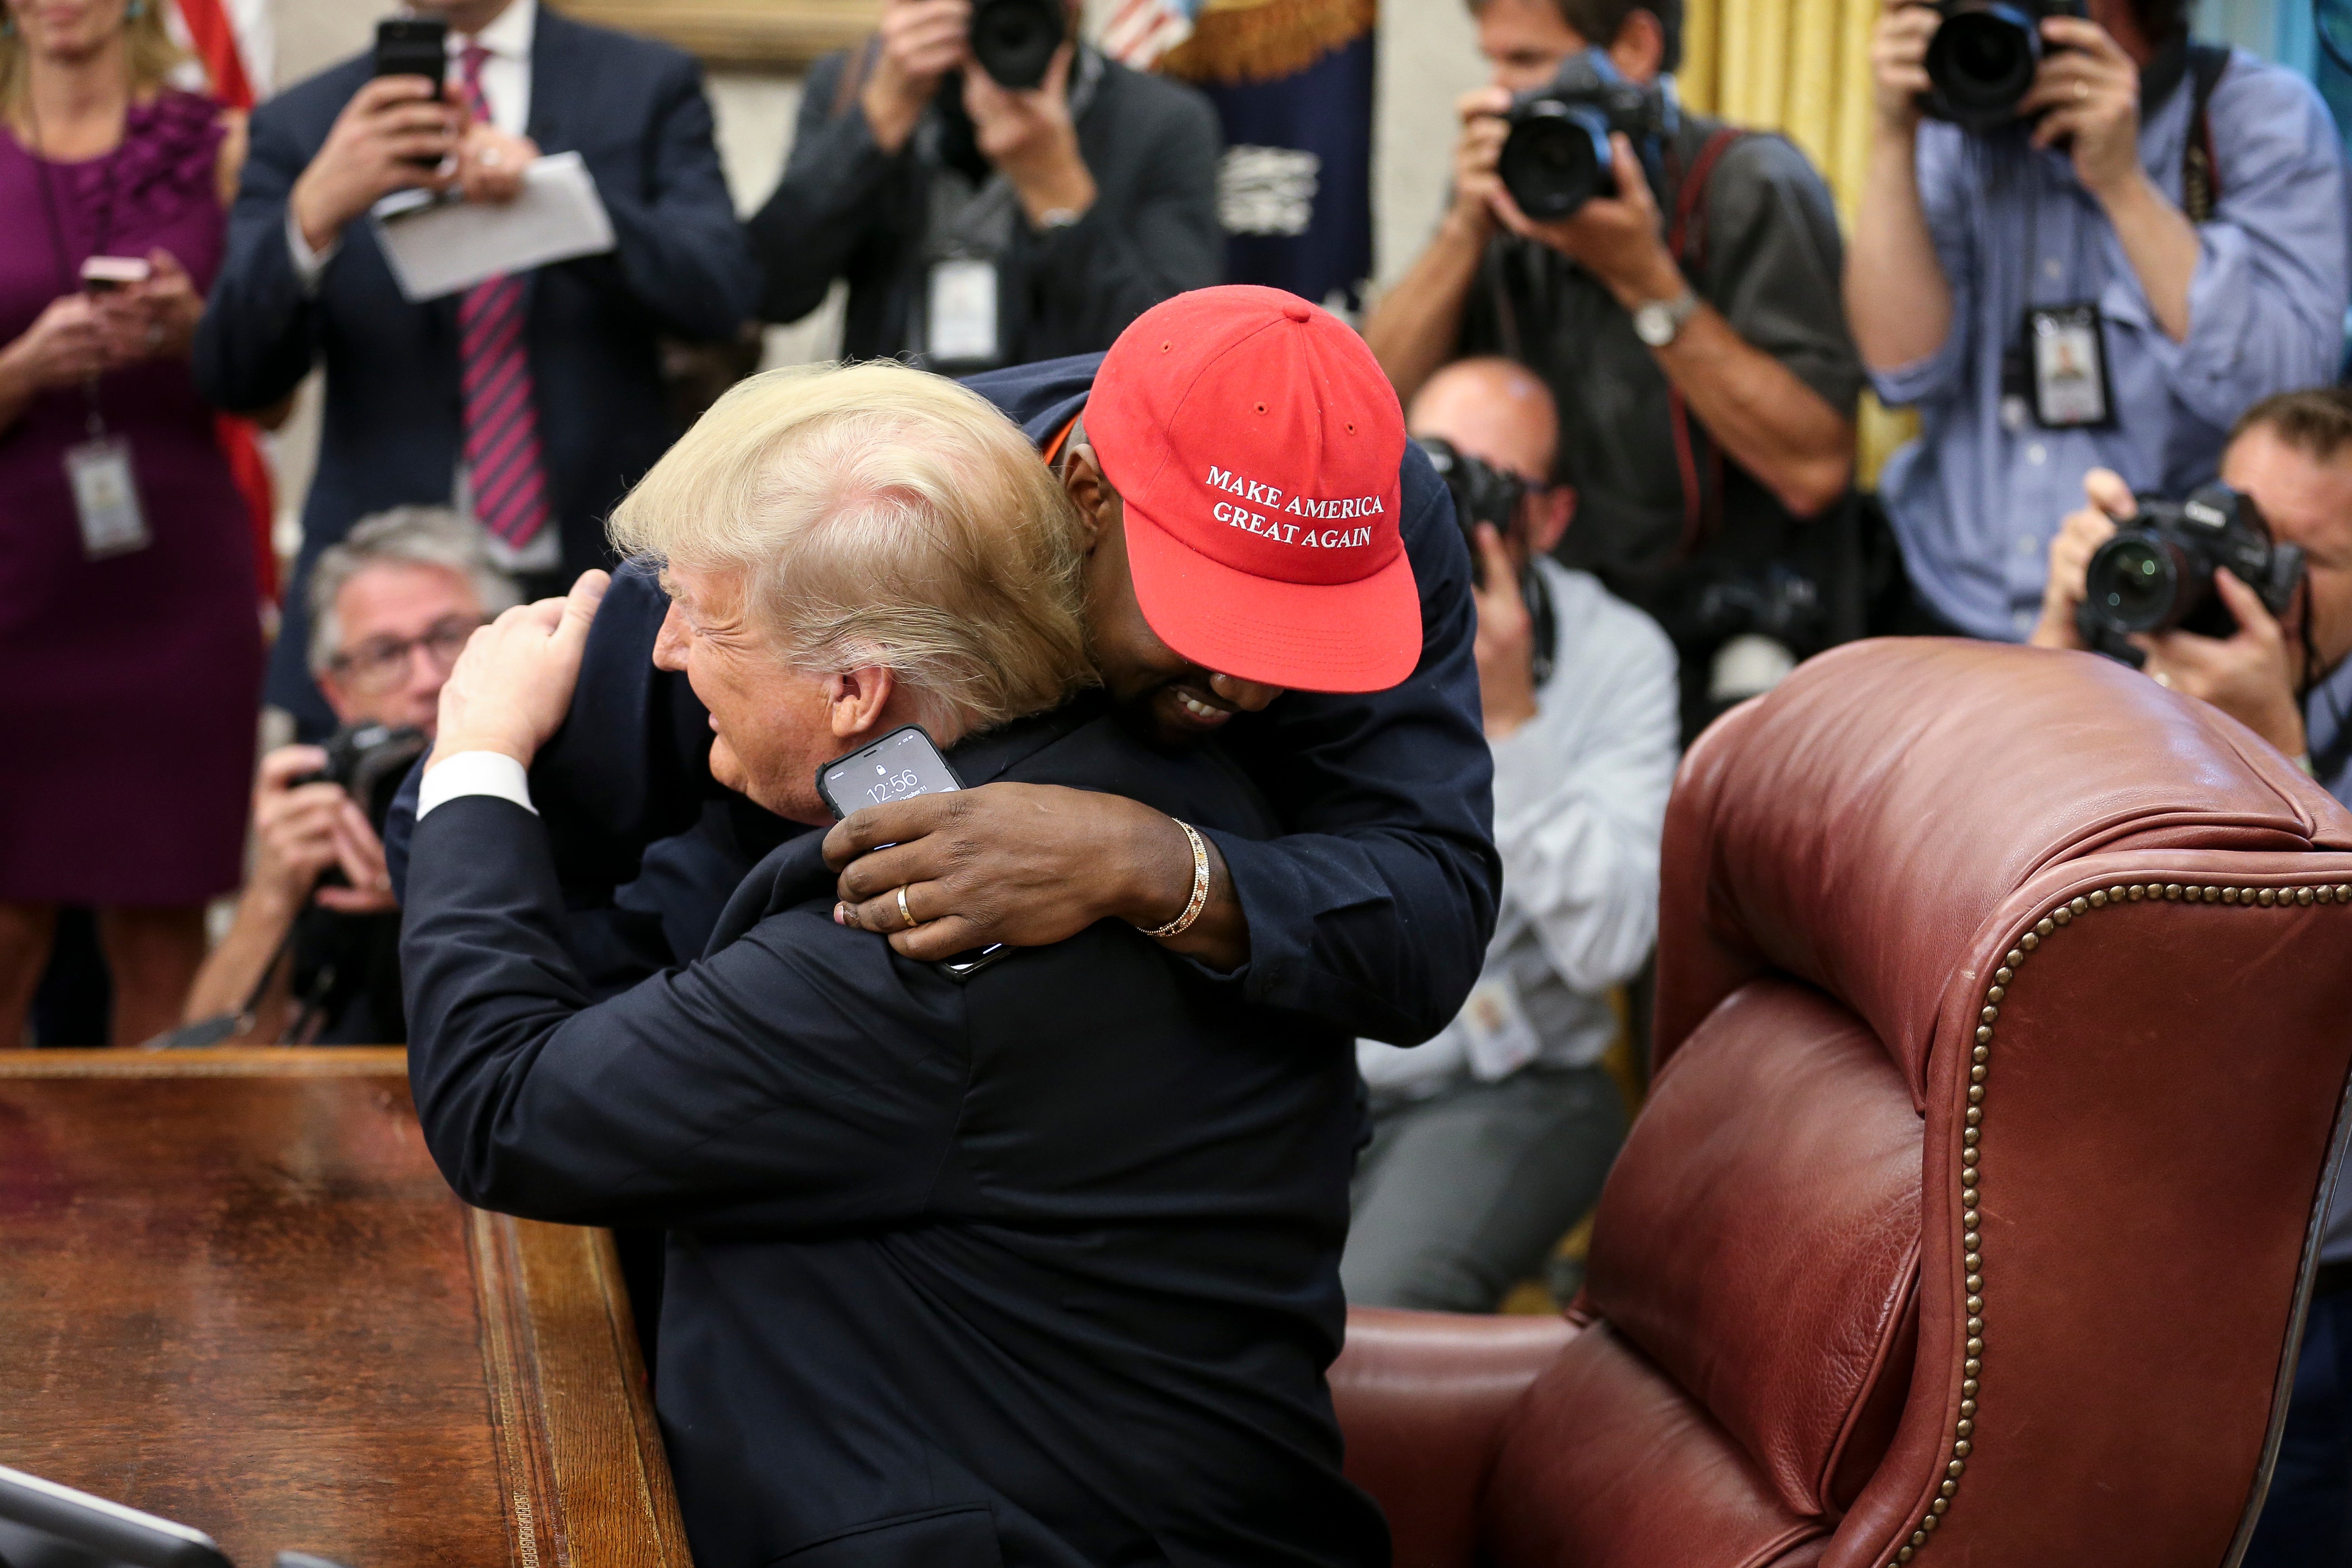 Rapper Kanye West and Donald Trump